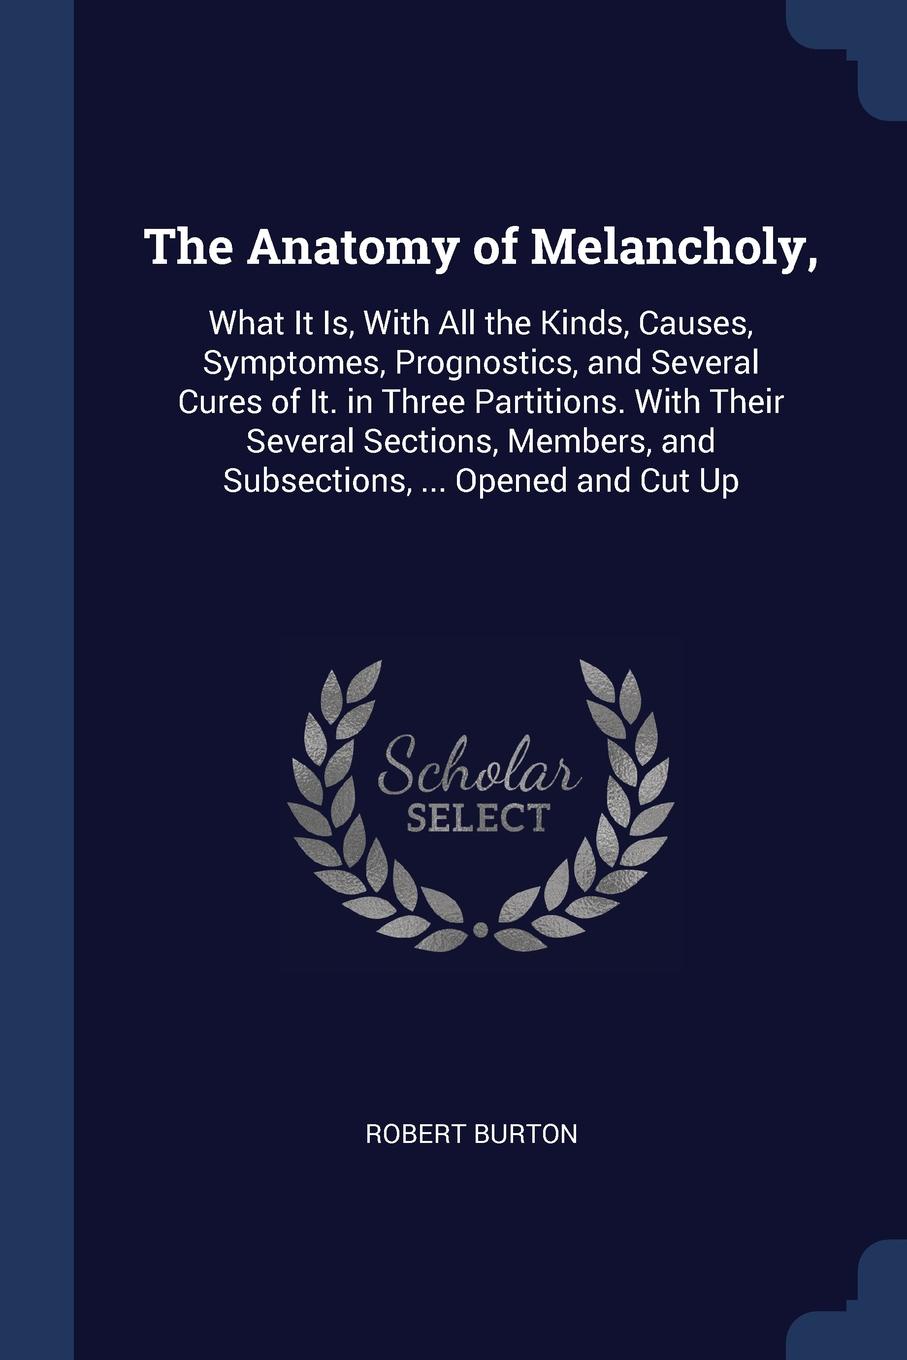 The Anatomy of Melancholy,. What It Is, With All the Kinds, Causes, Symptomes, Prognostics, and Several Cures of It. in Three Partitions. With Their Several Sections, Members, and Subsections, ... Opened and Cut Up